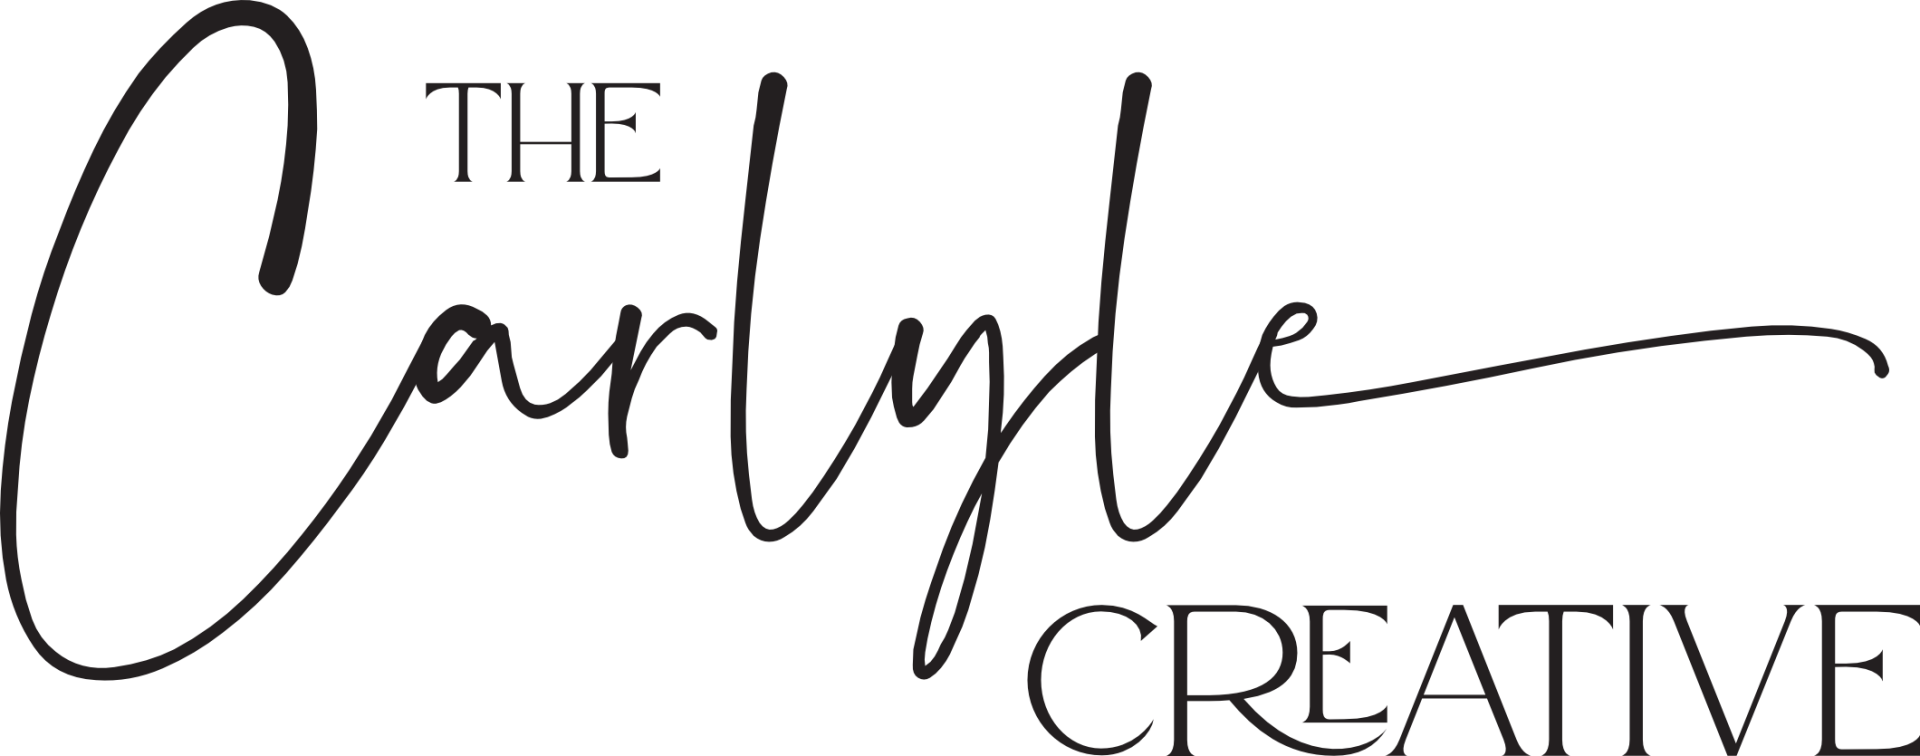 The Carlyle Creative